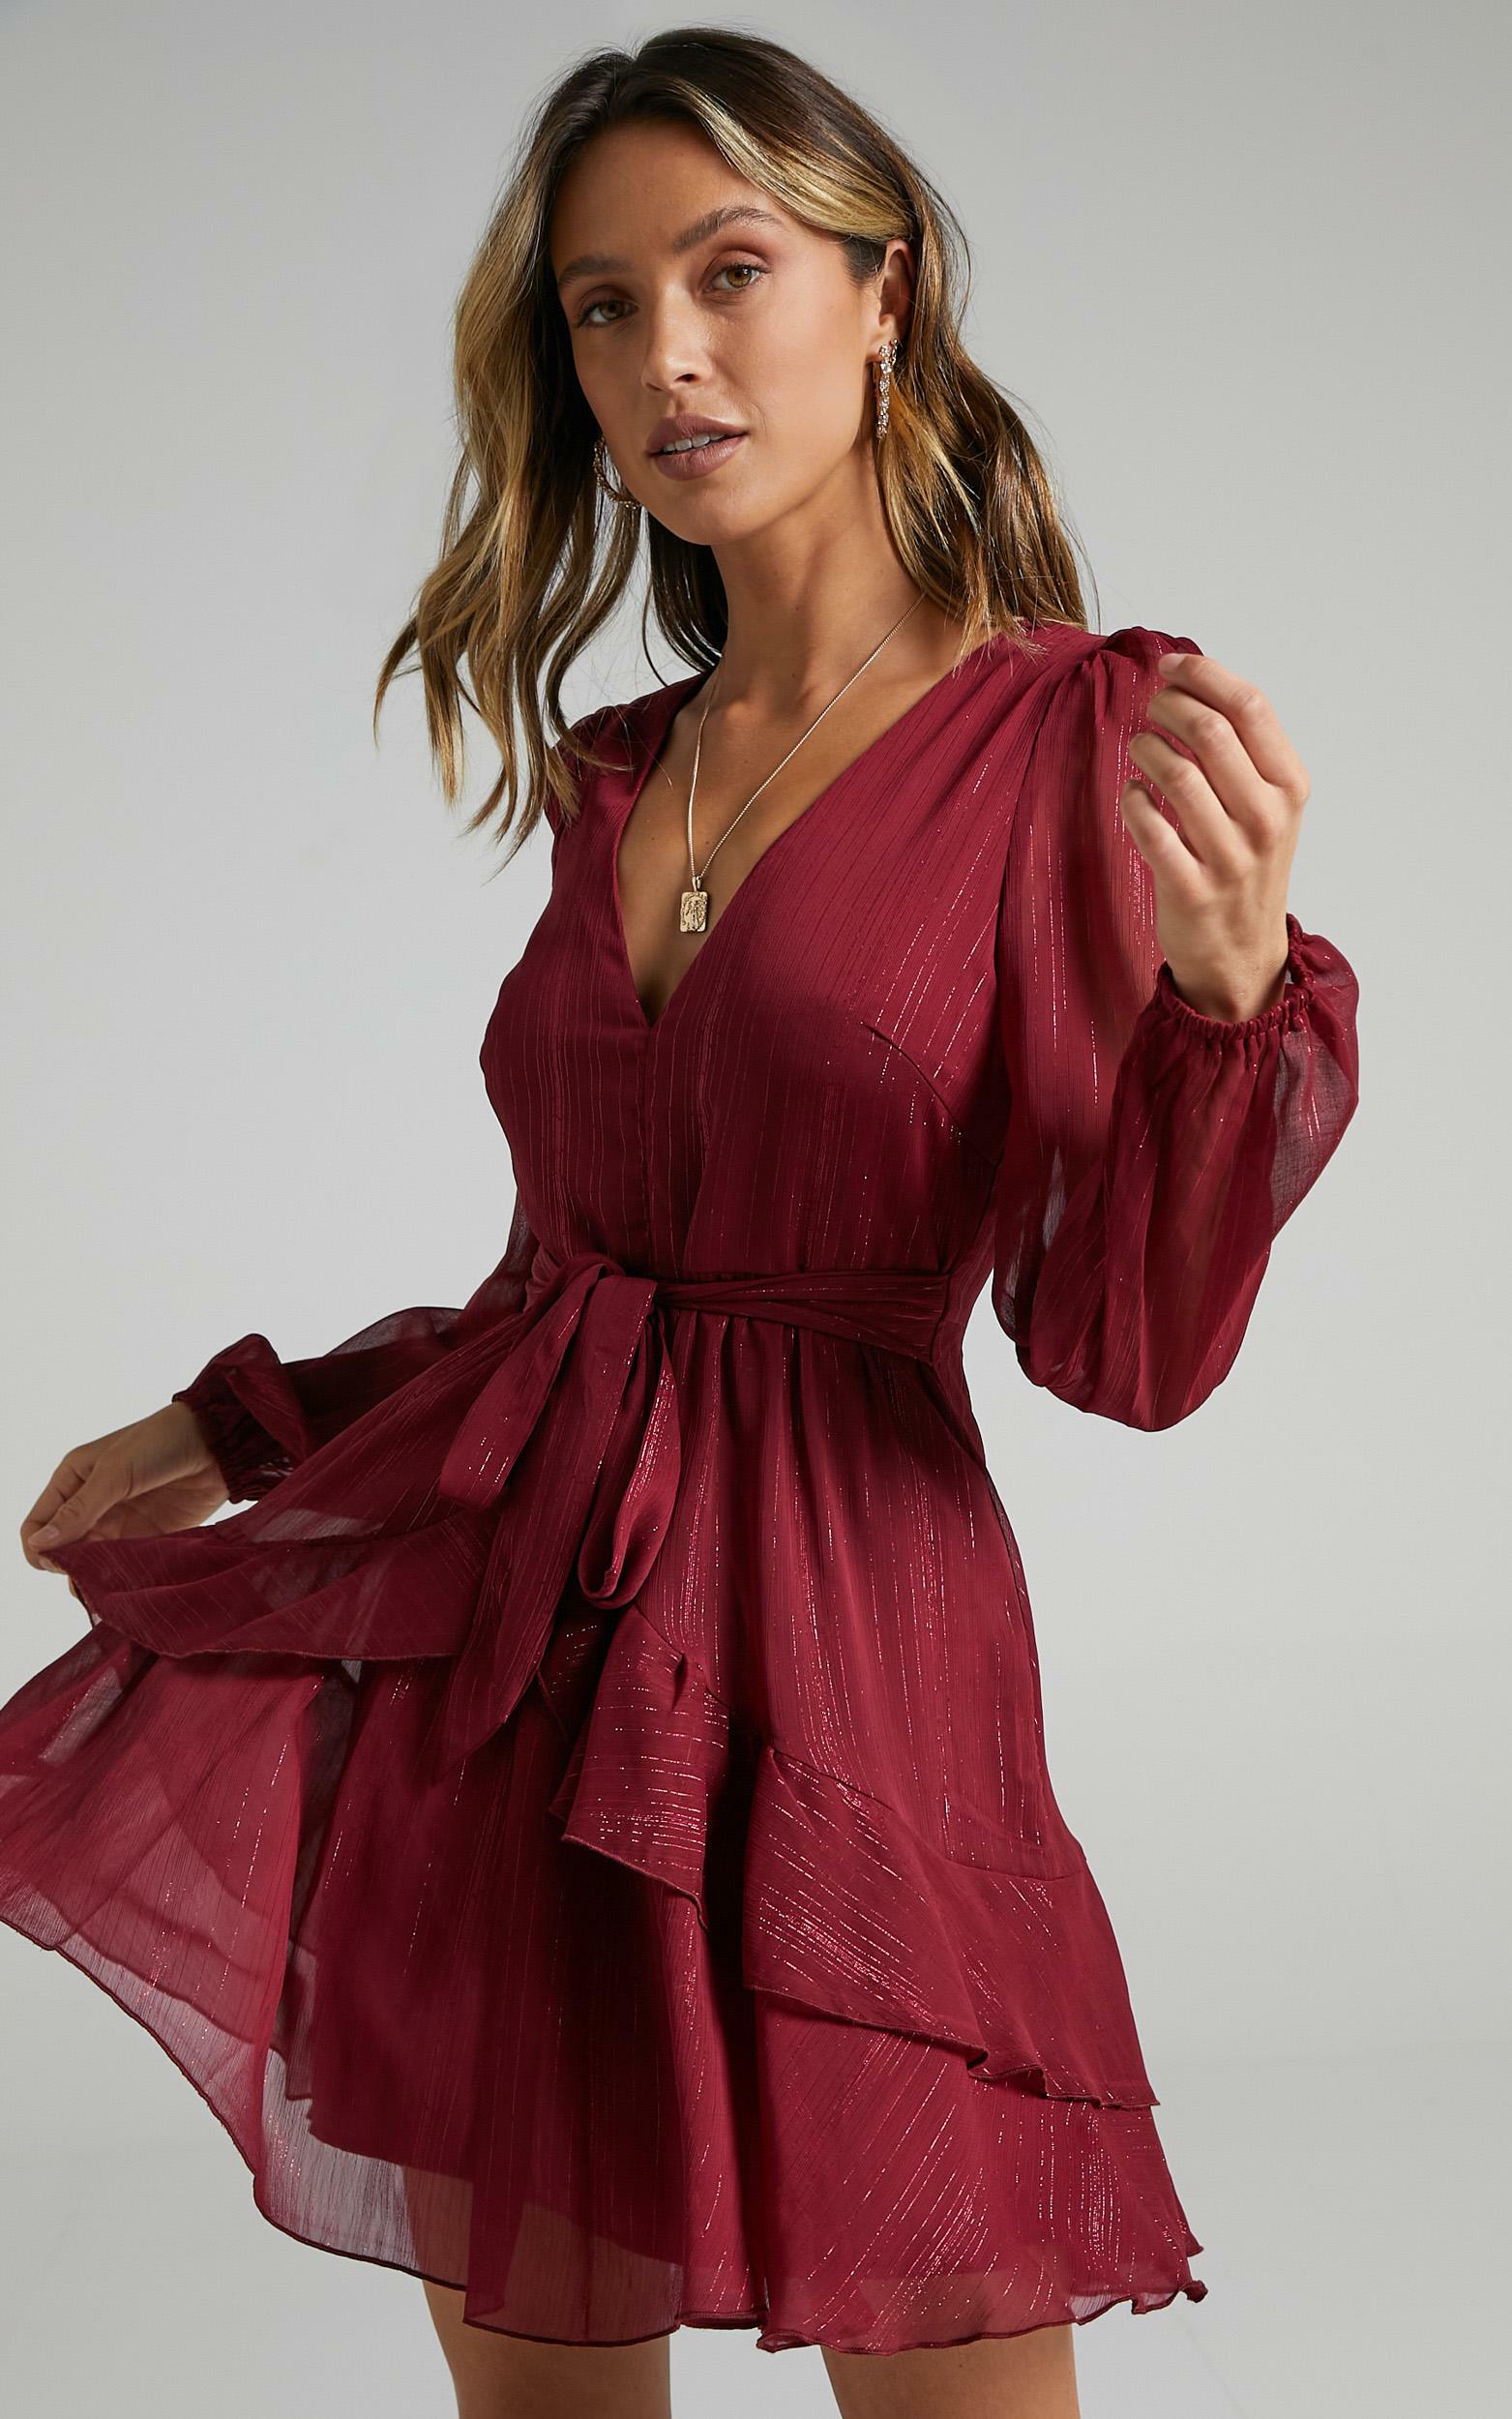 Eyes That Know Me Long Sleeve Ruffle Mini Dress in Wine - 20, WNE3, hi-res image number null